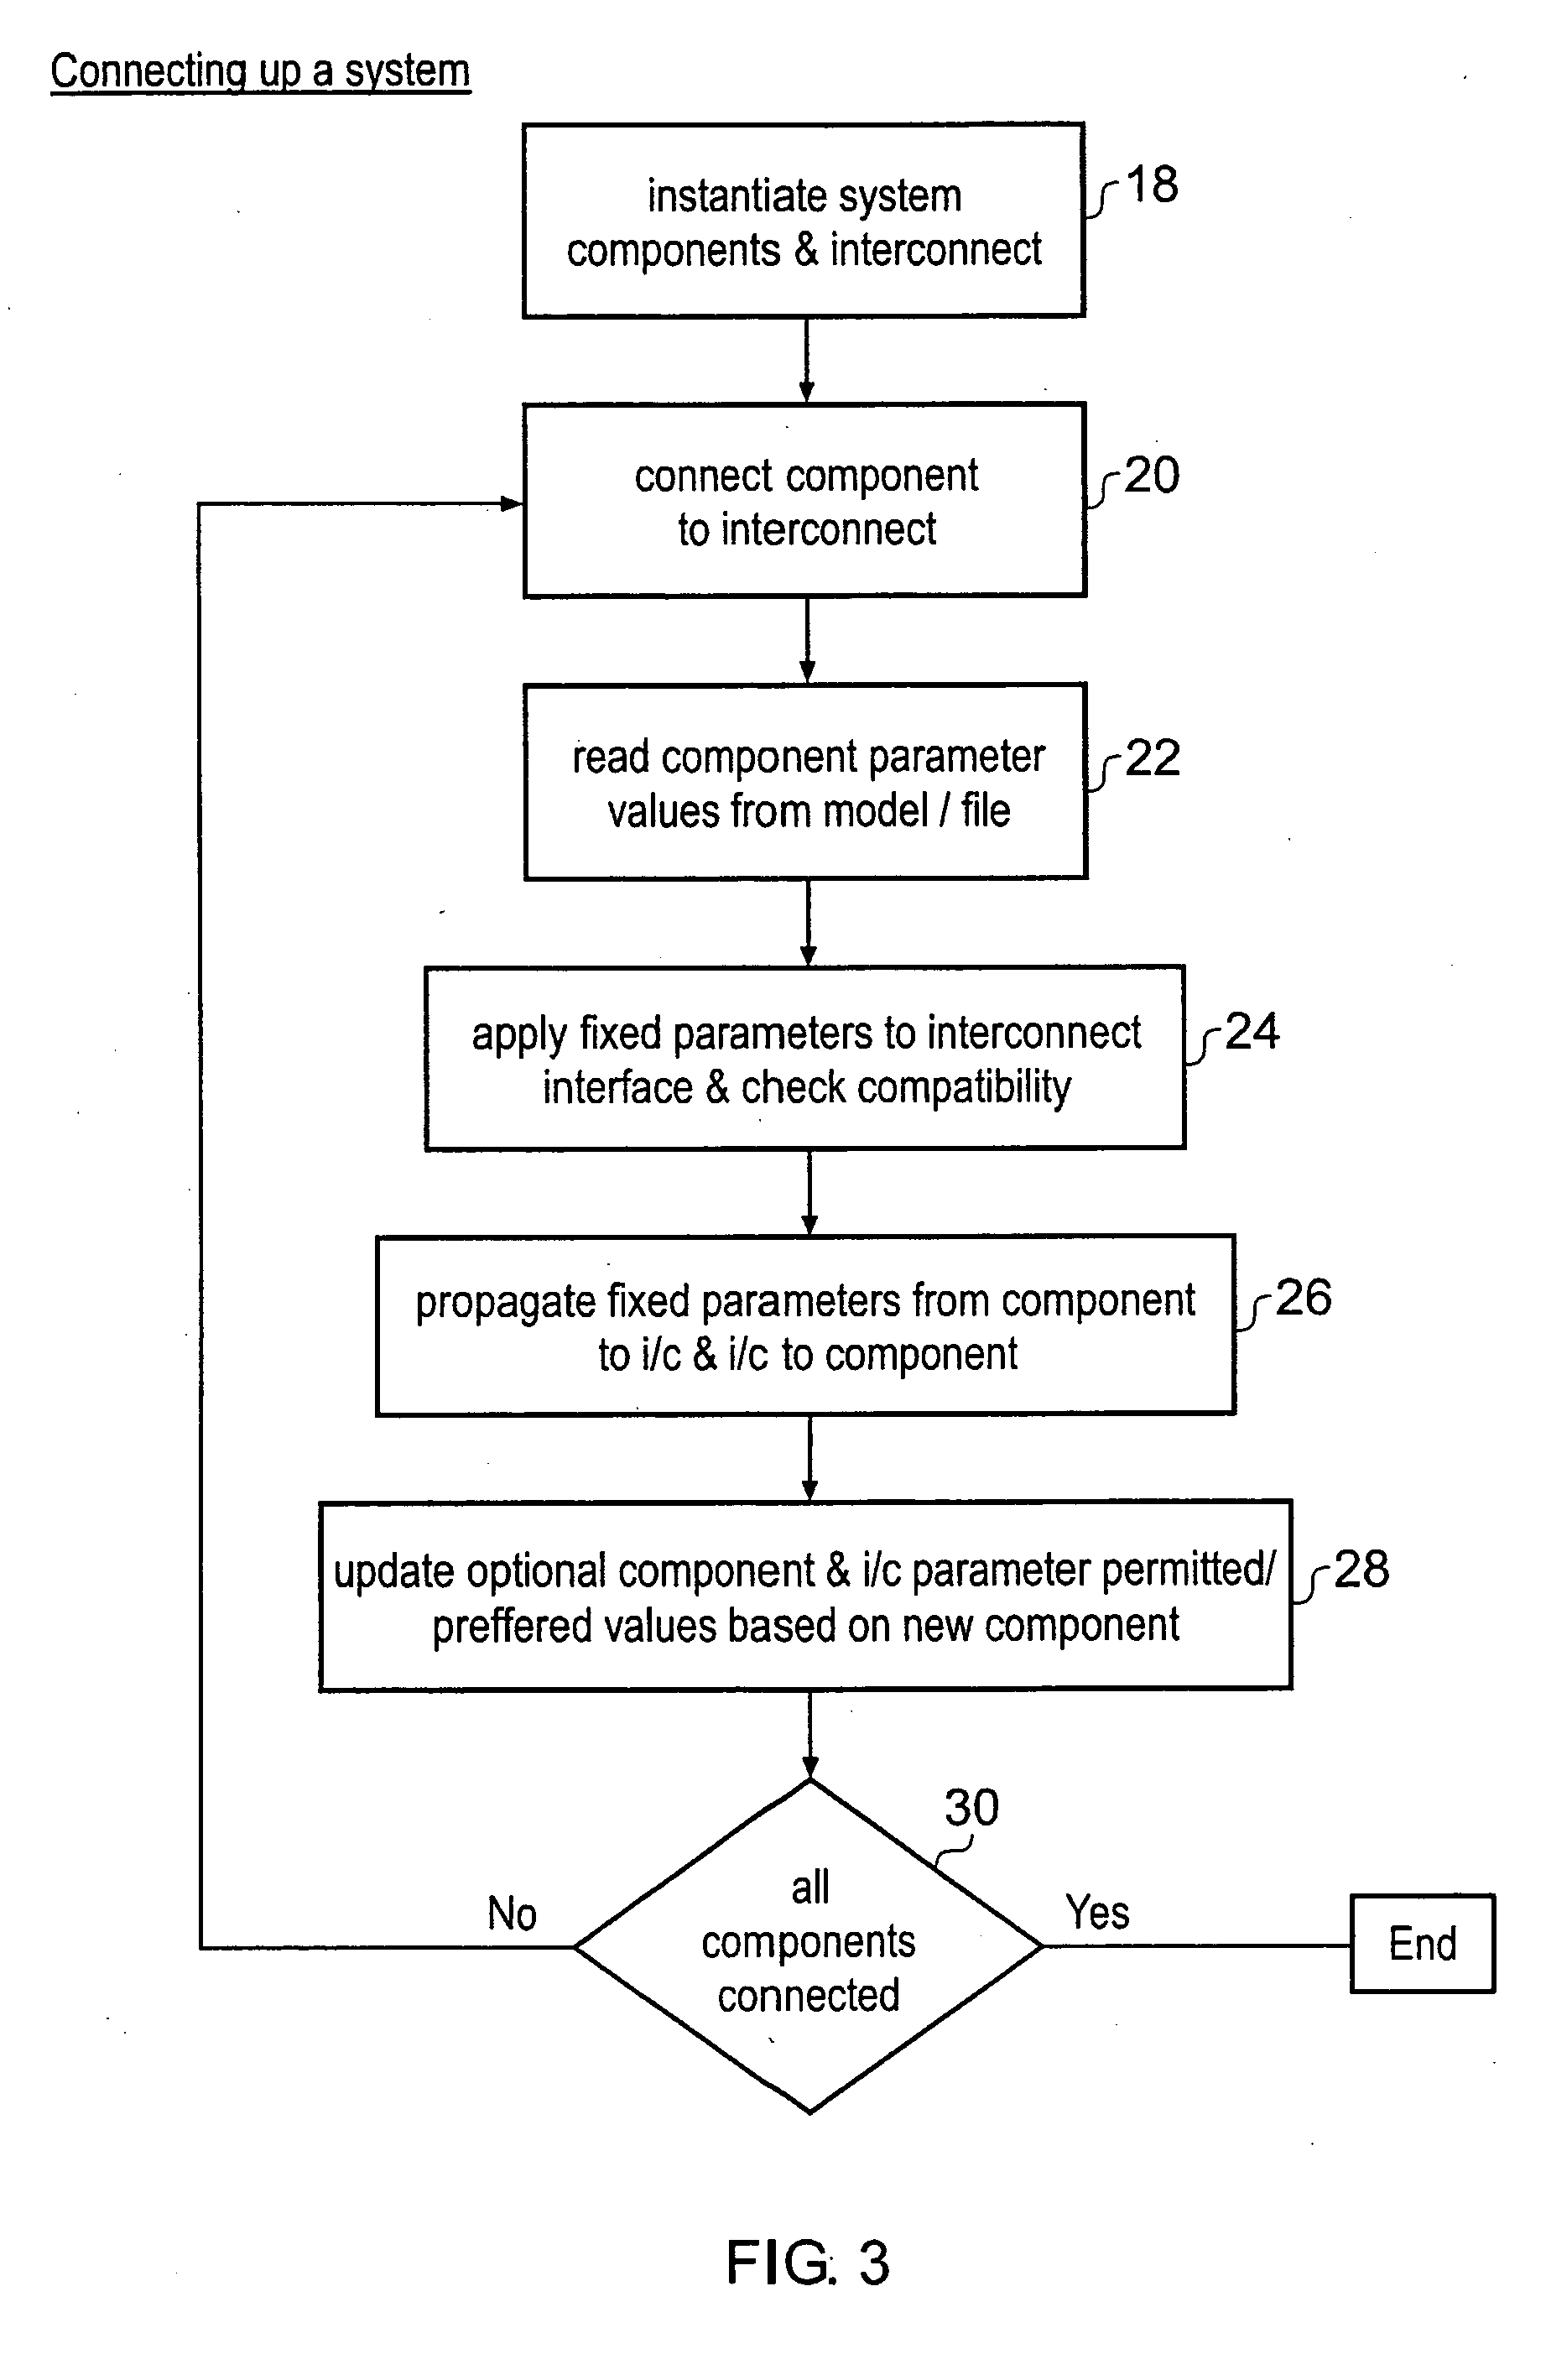 Interconnect component and device configuration generation